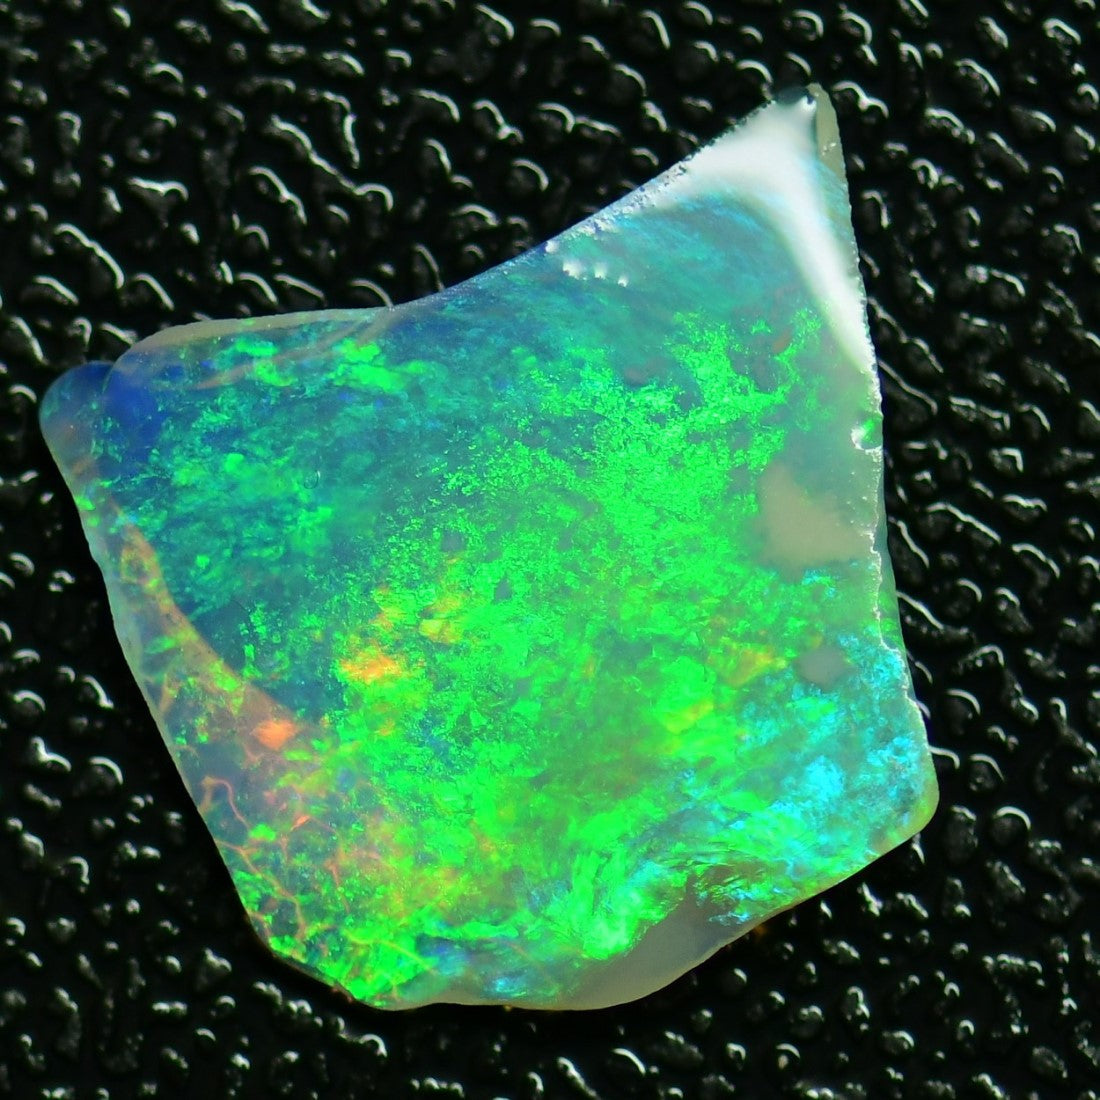 3.46 cts Australian Rough Opal Lightning Ridge Thin For Doublet or Inlay